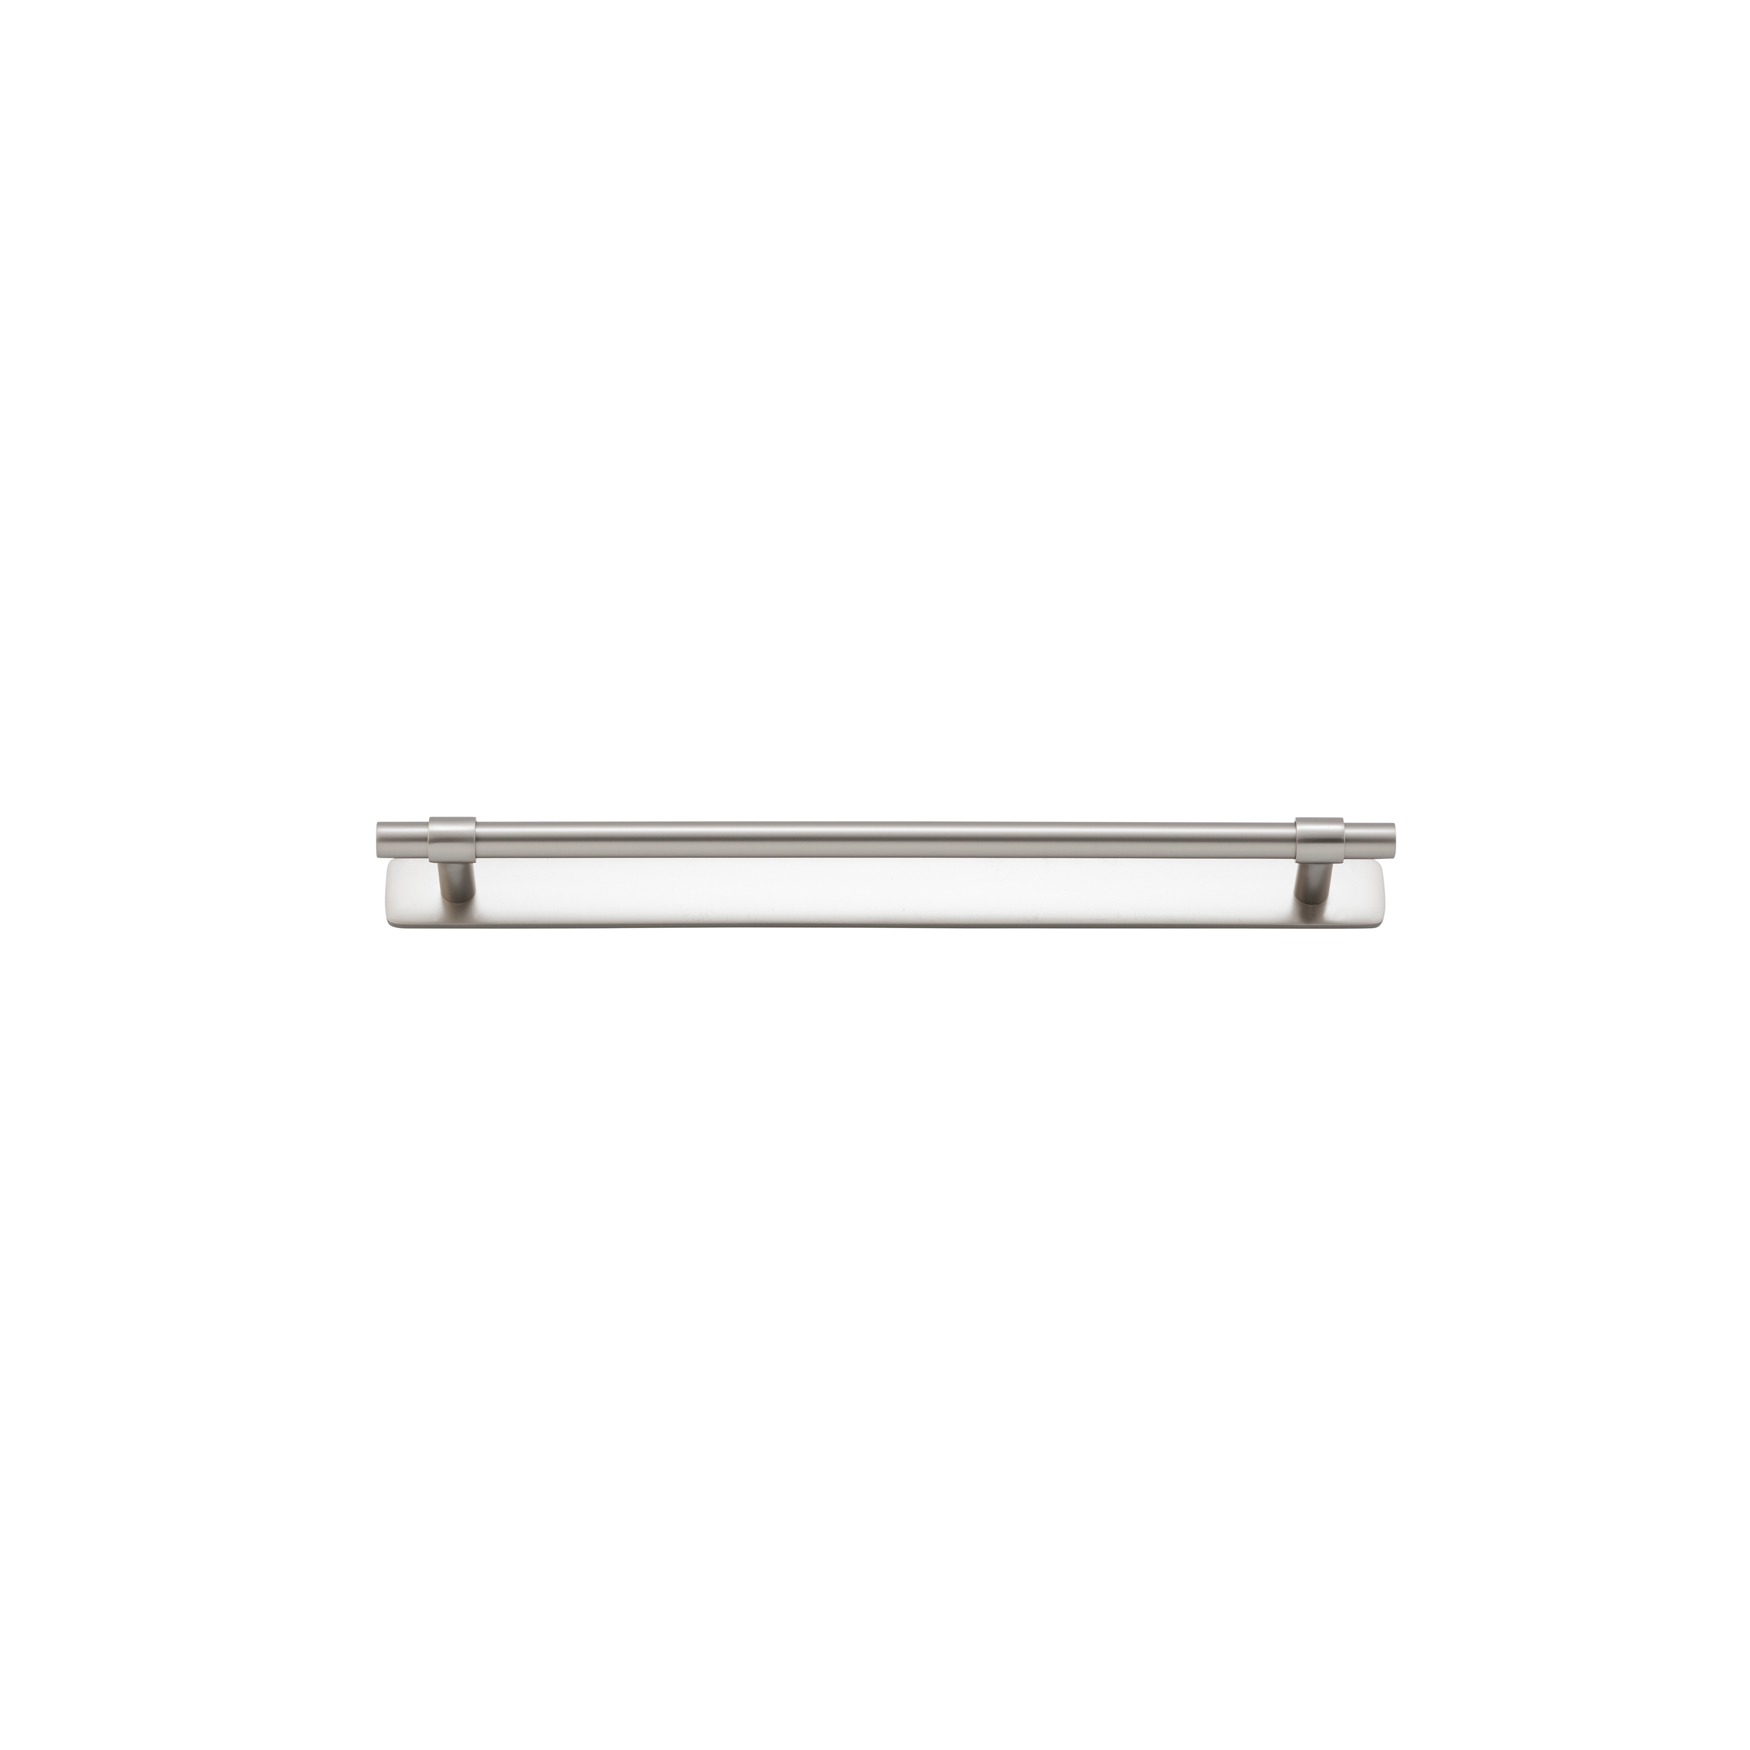 21029B - Helsinki Cabinet Pull with Backplate - CTC256mm - Satin Nickel